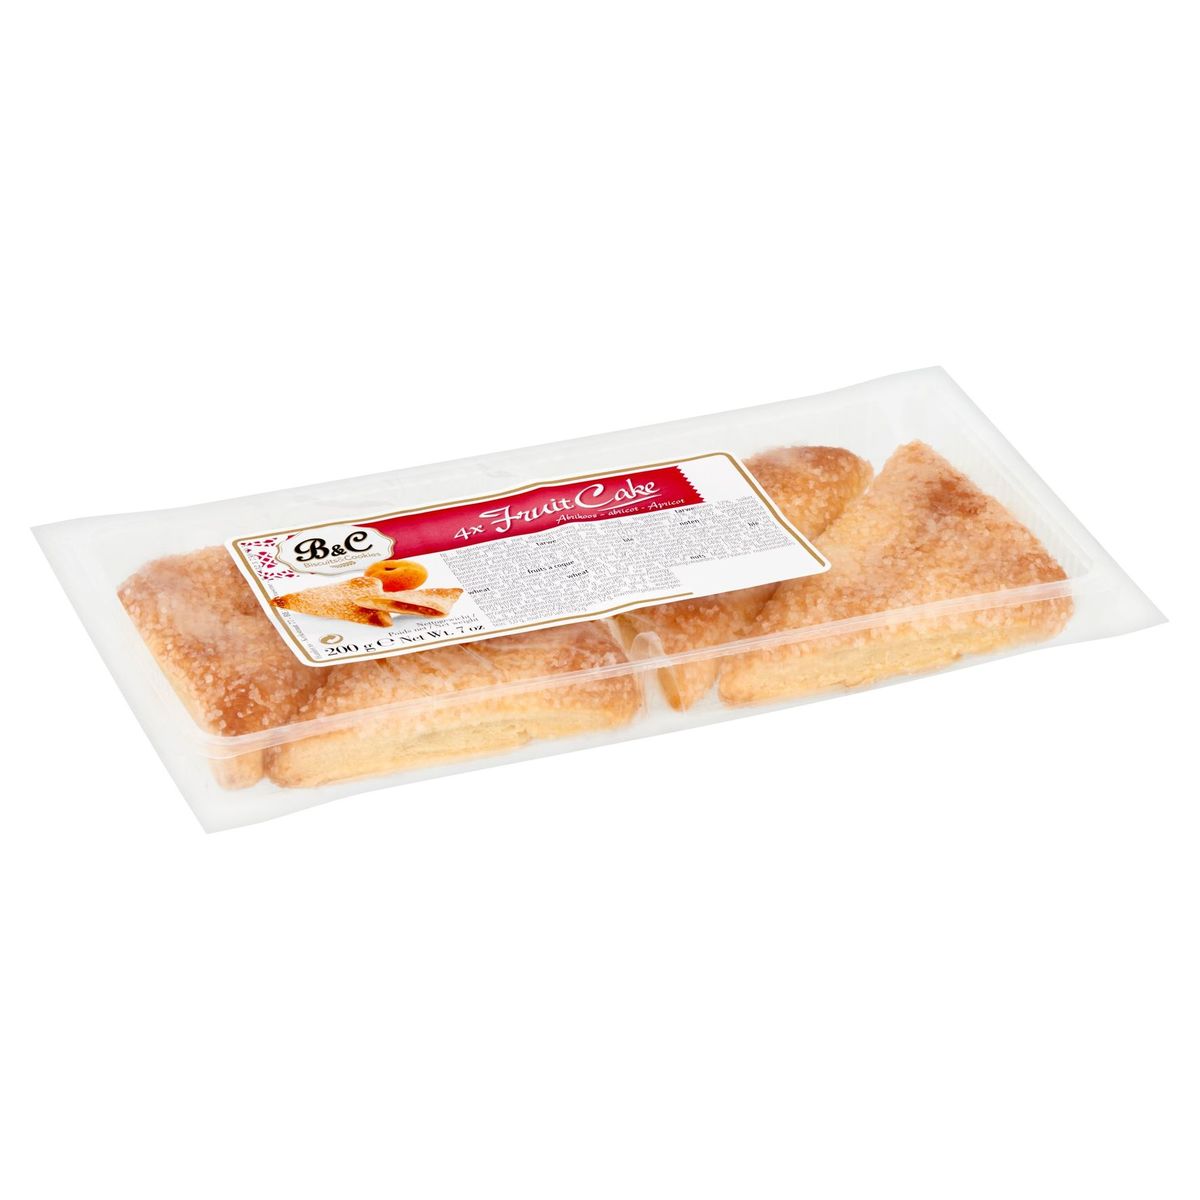 B&C Biscuits & Cookies Fruit Cake Abricot 4 Pièces 200 g